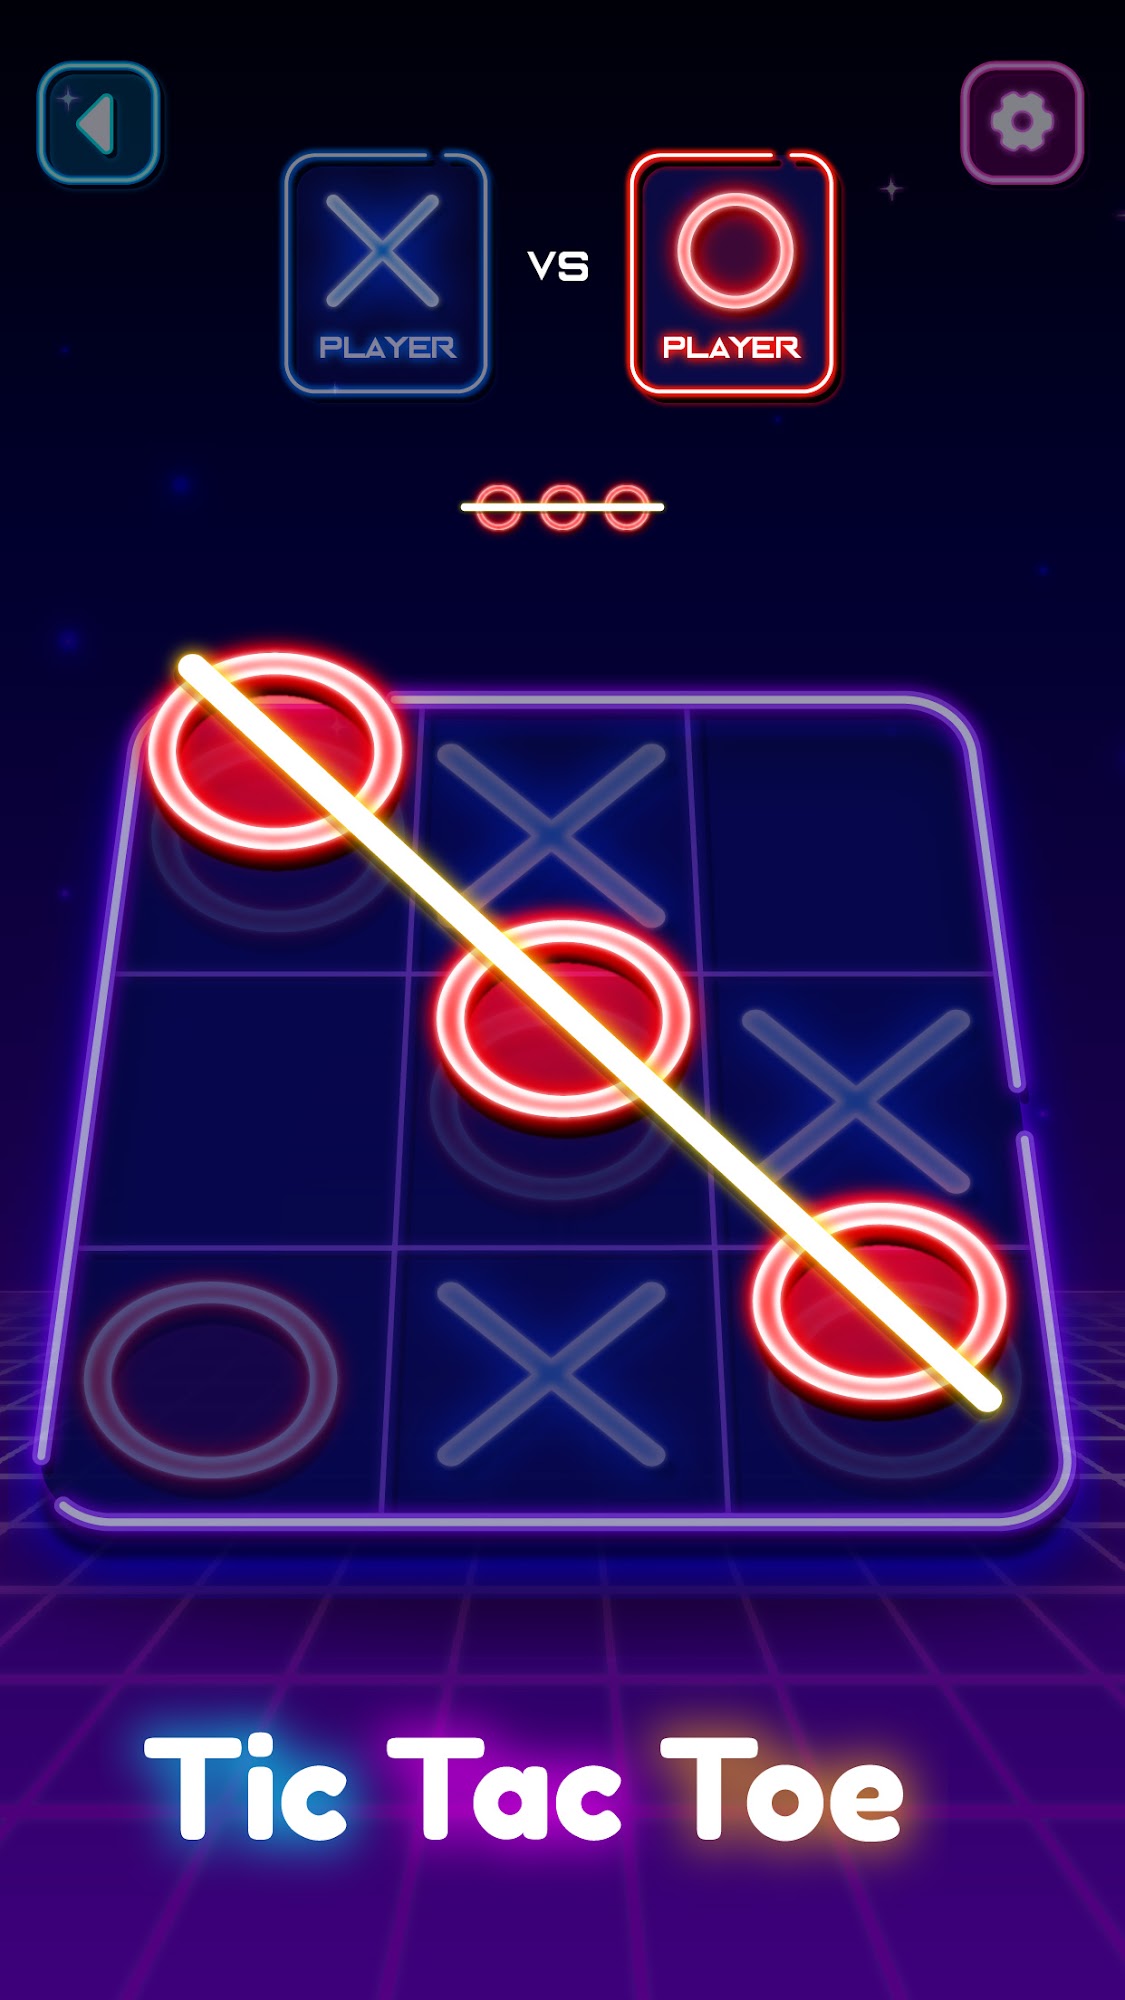 Download Tic Tac Toe - 2 Player XO für Android kostenlos.